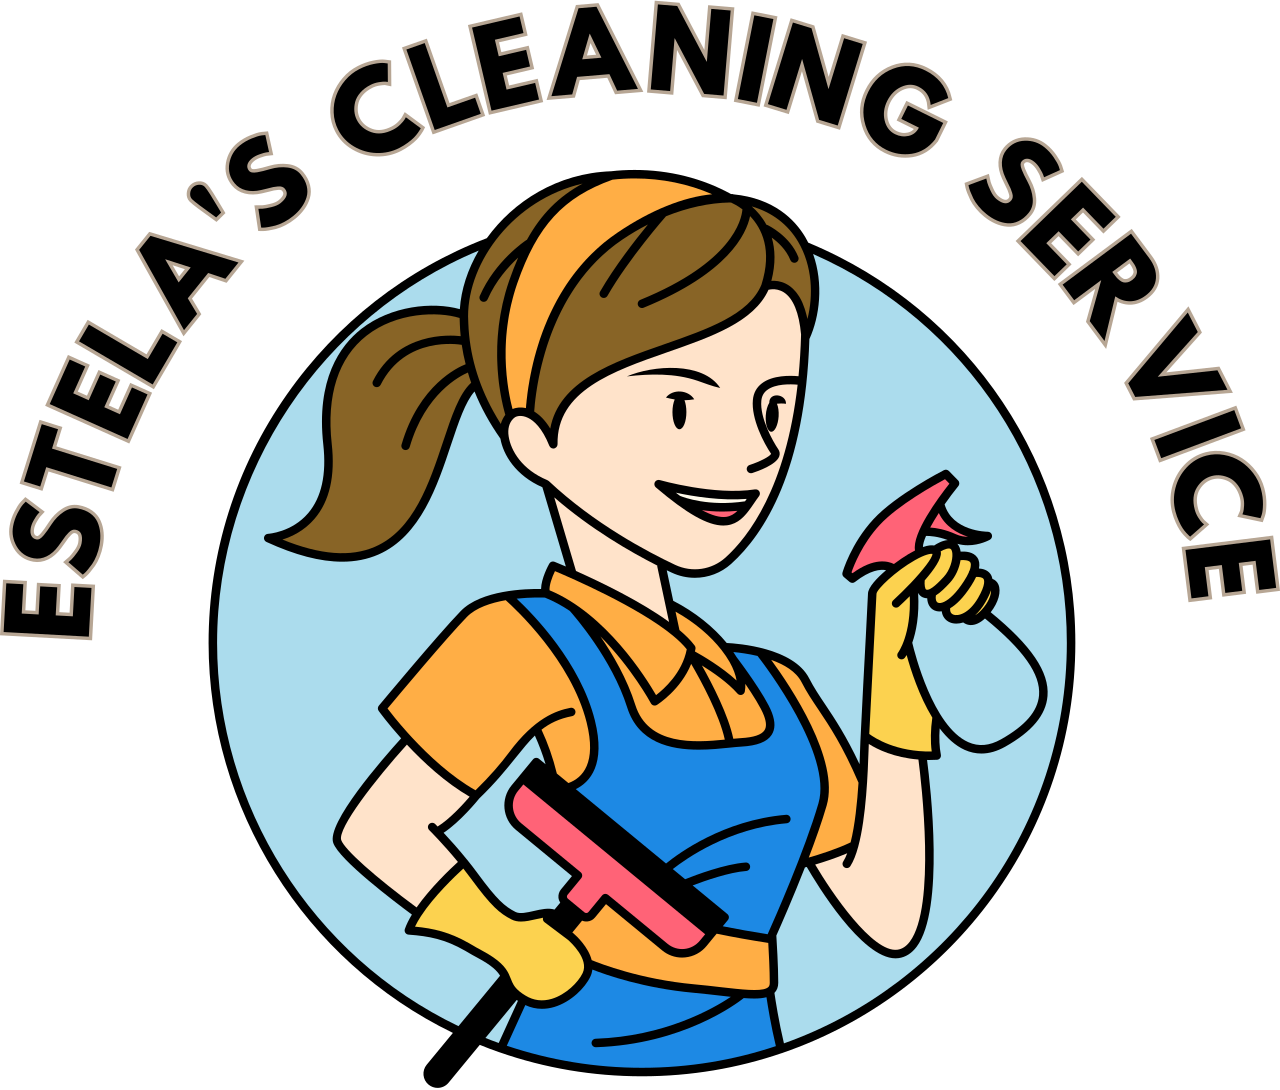 ESTELA'S CLEANING SERVICE 's web page